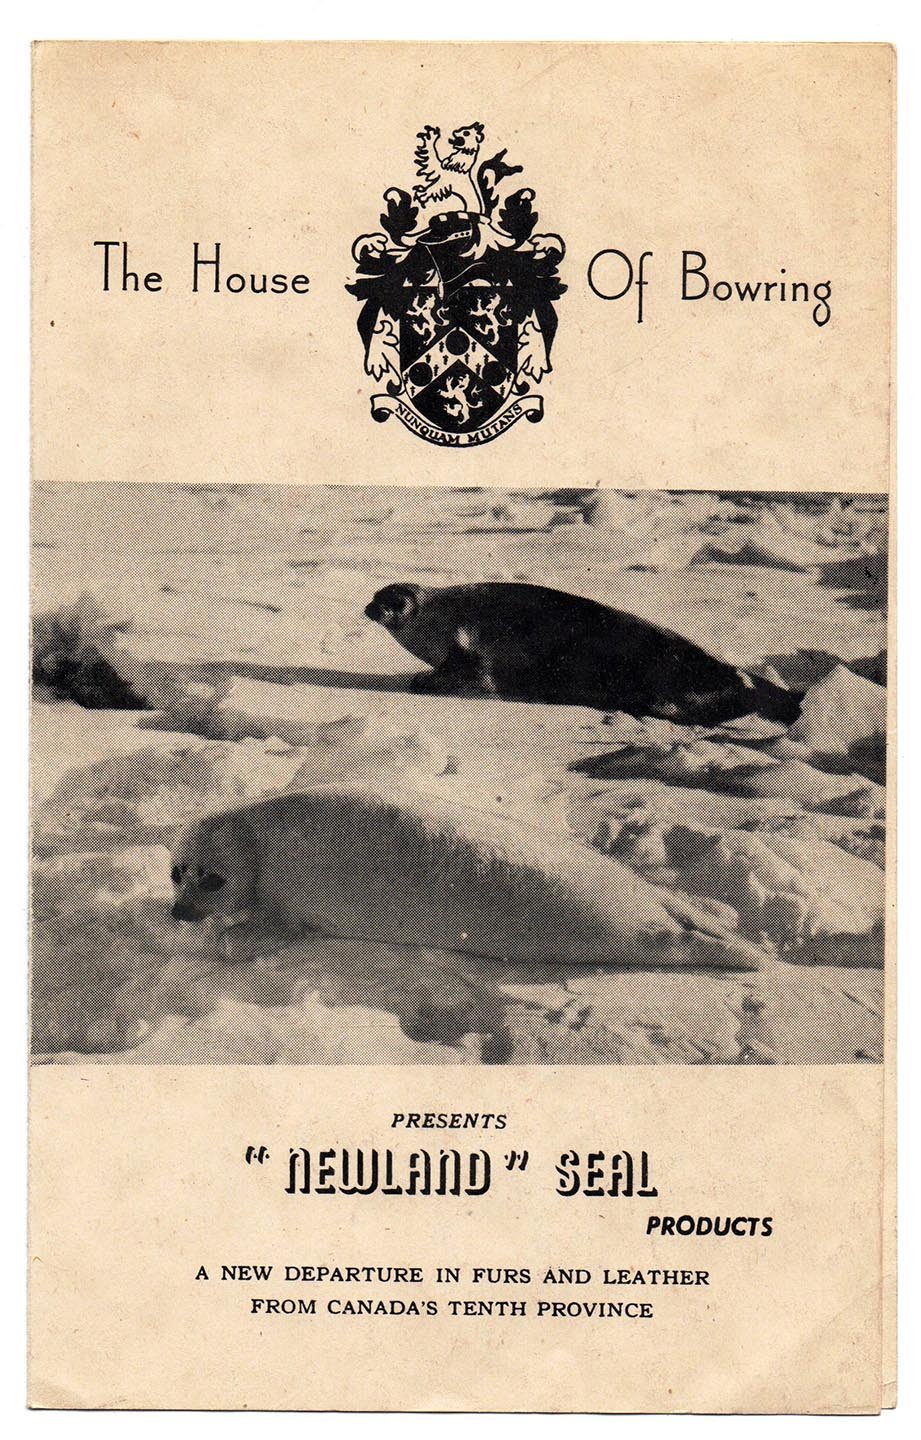 The House Of Bowring Presents "Newland" Seal Products